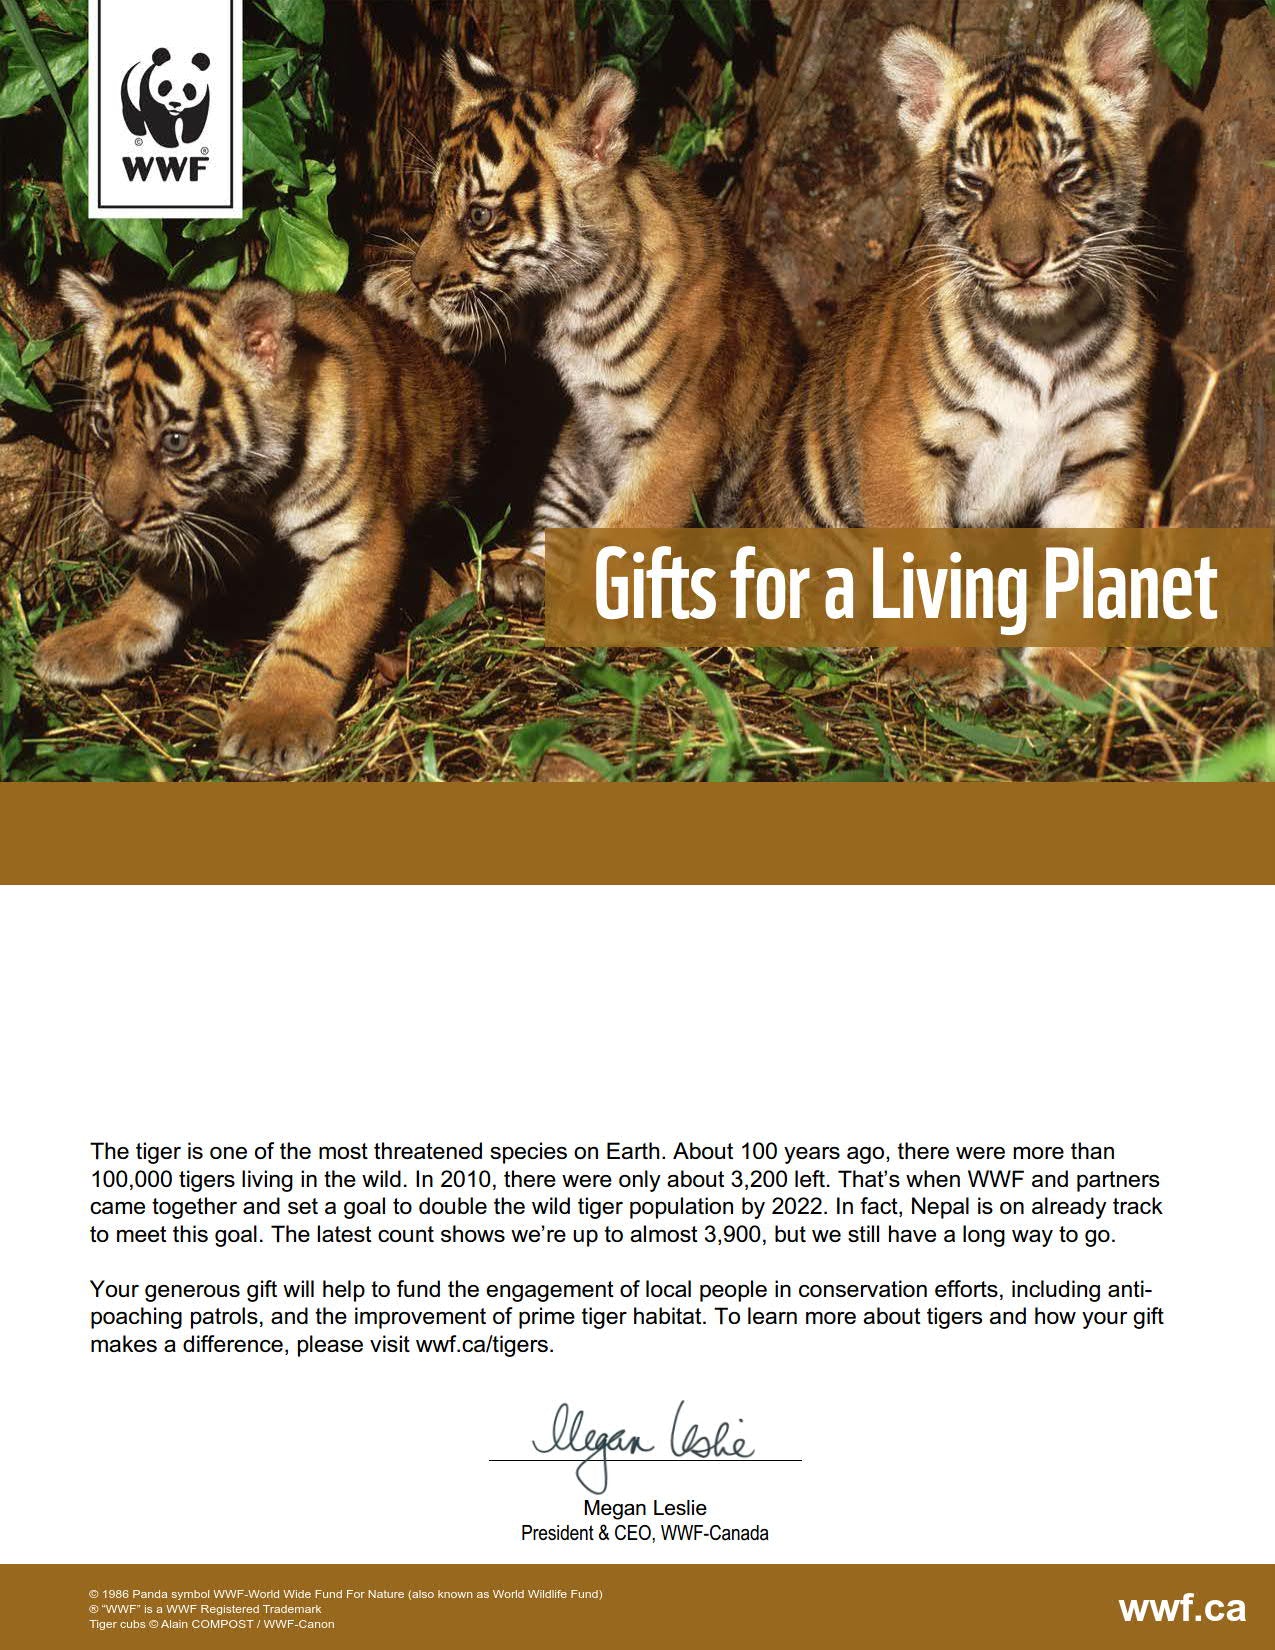 give a tiger a fighting chance - WWF-Canada